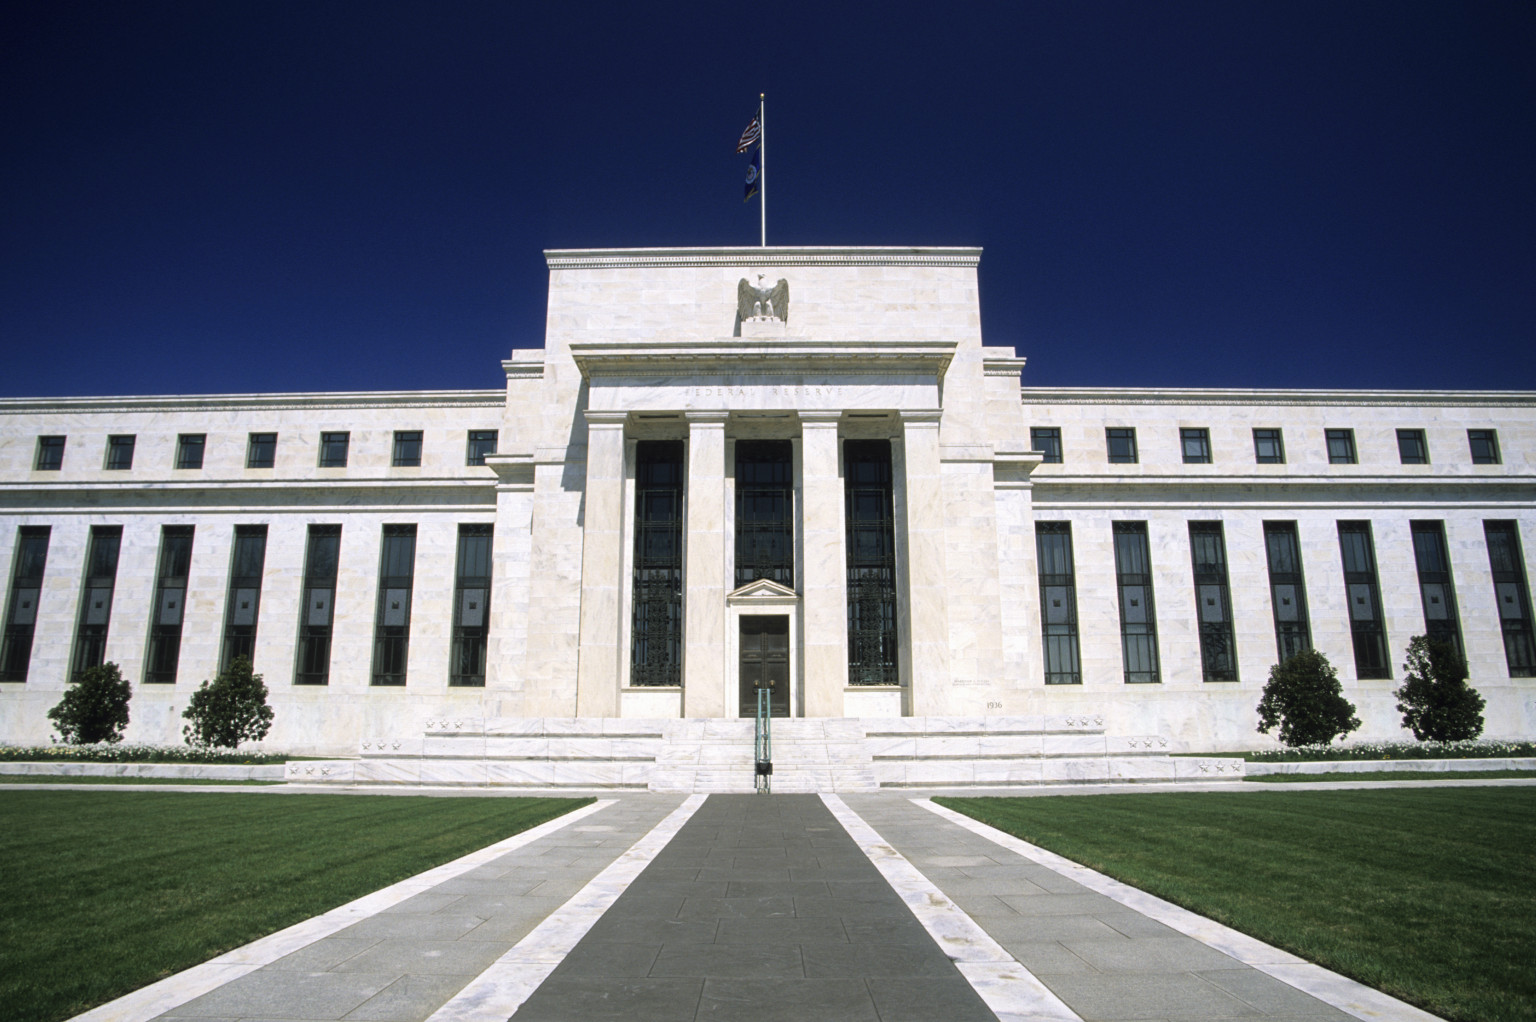 Federal Reserve Bank Finalizes Rules To Help Unwind “Too Big To Fail” Big Banks